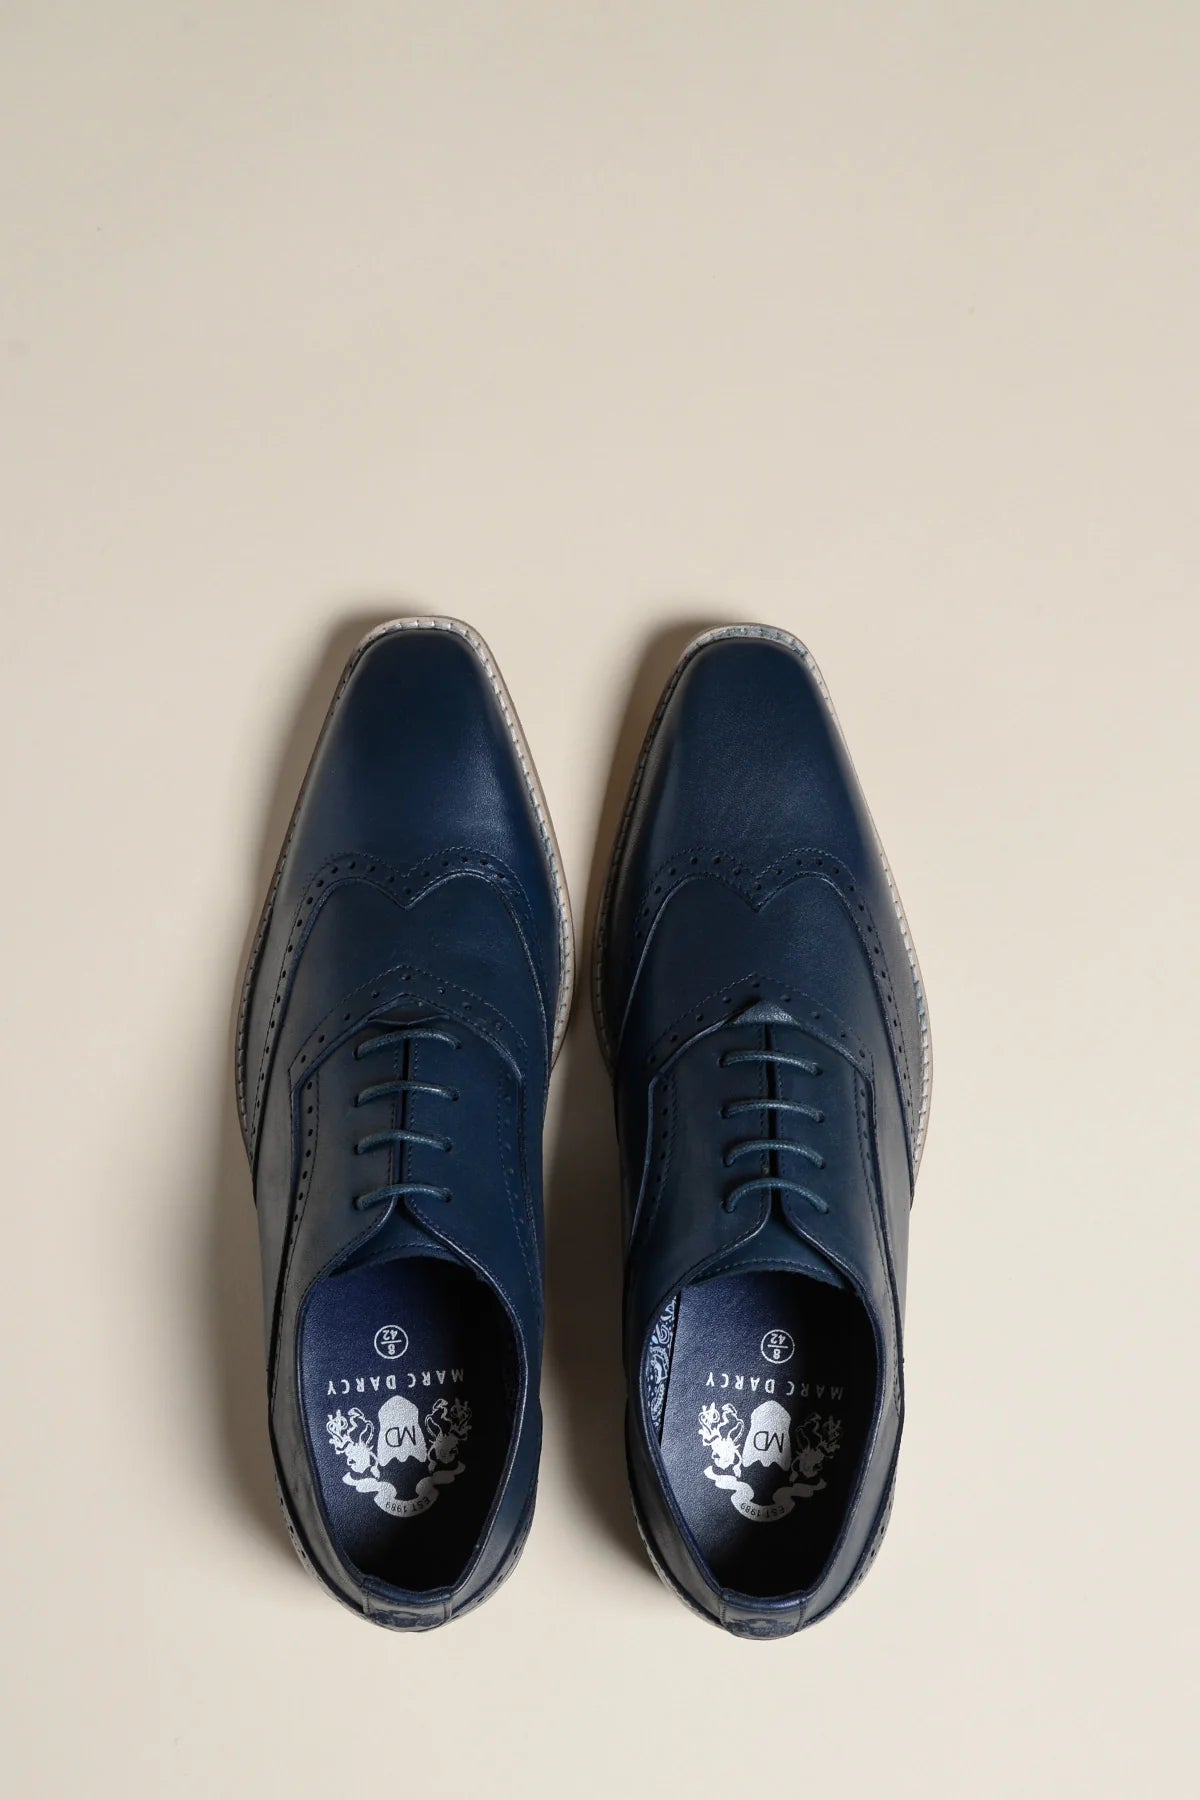 Navy leather shoes, Marc Darcy Dawson - Wingtip brogue